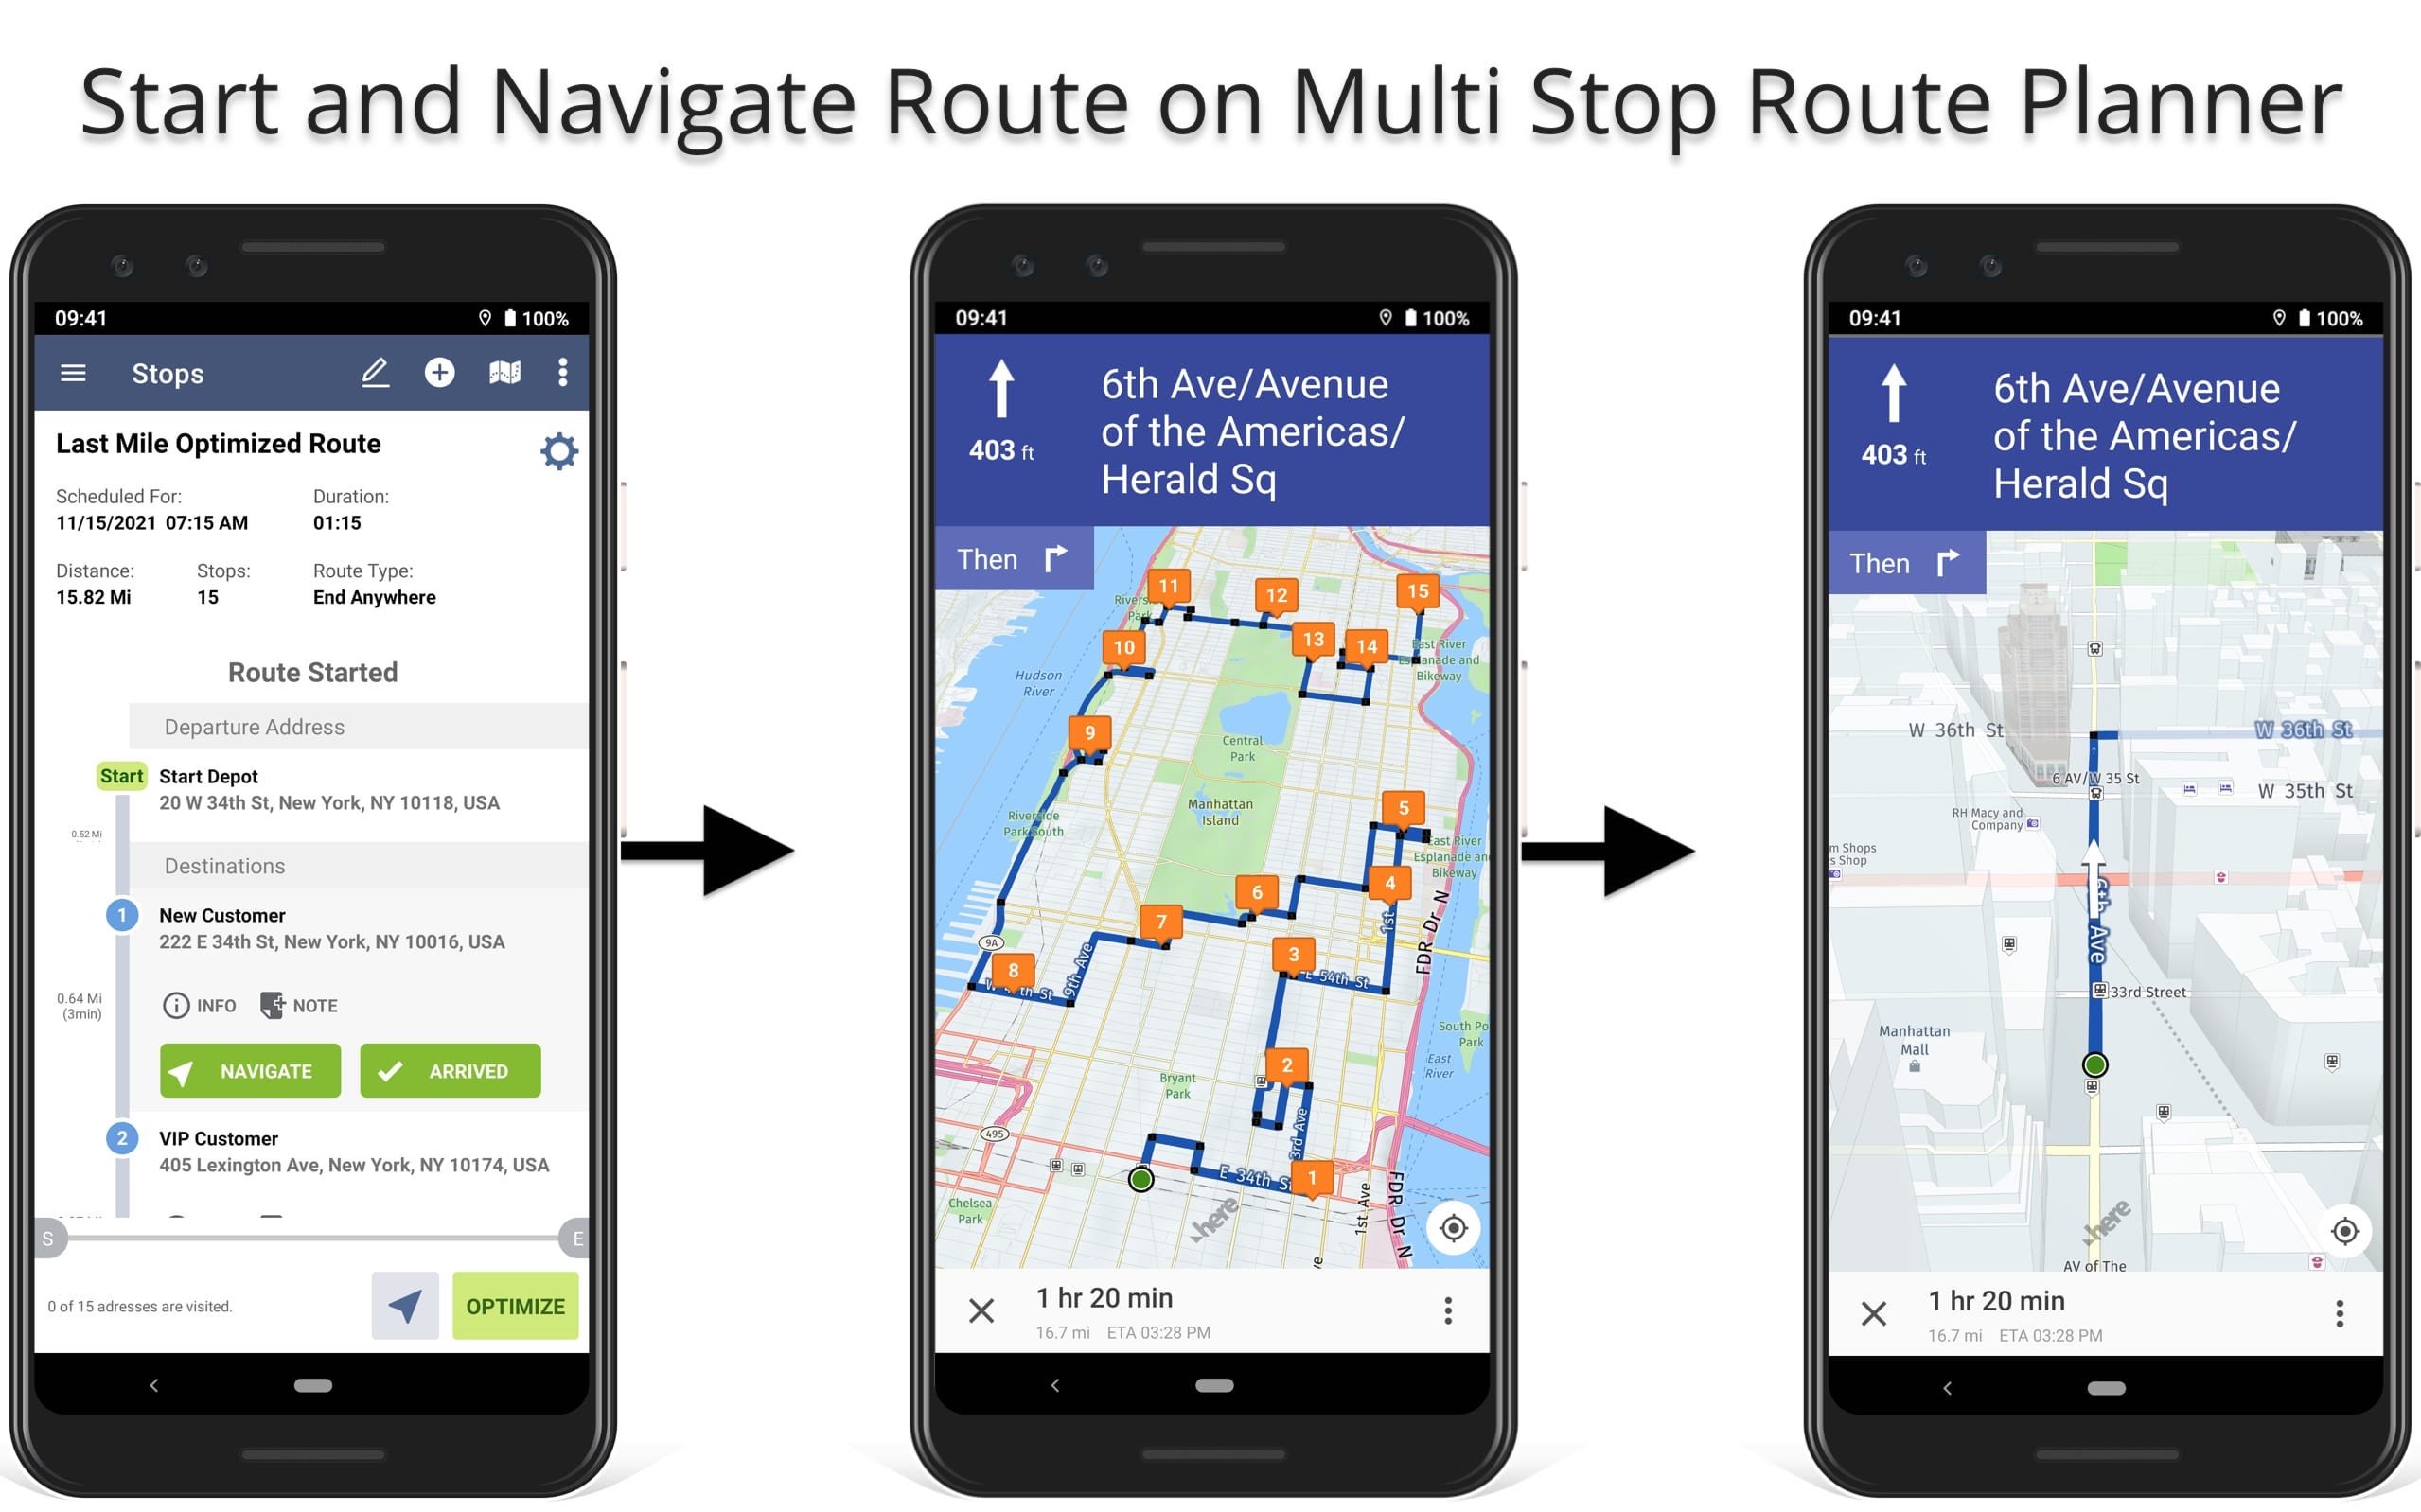 Start and navigate the optimized route using voice-guided navigation on Multi Stop Route Planner